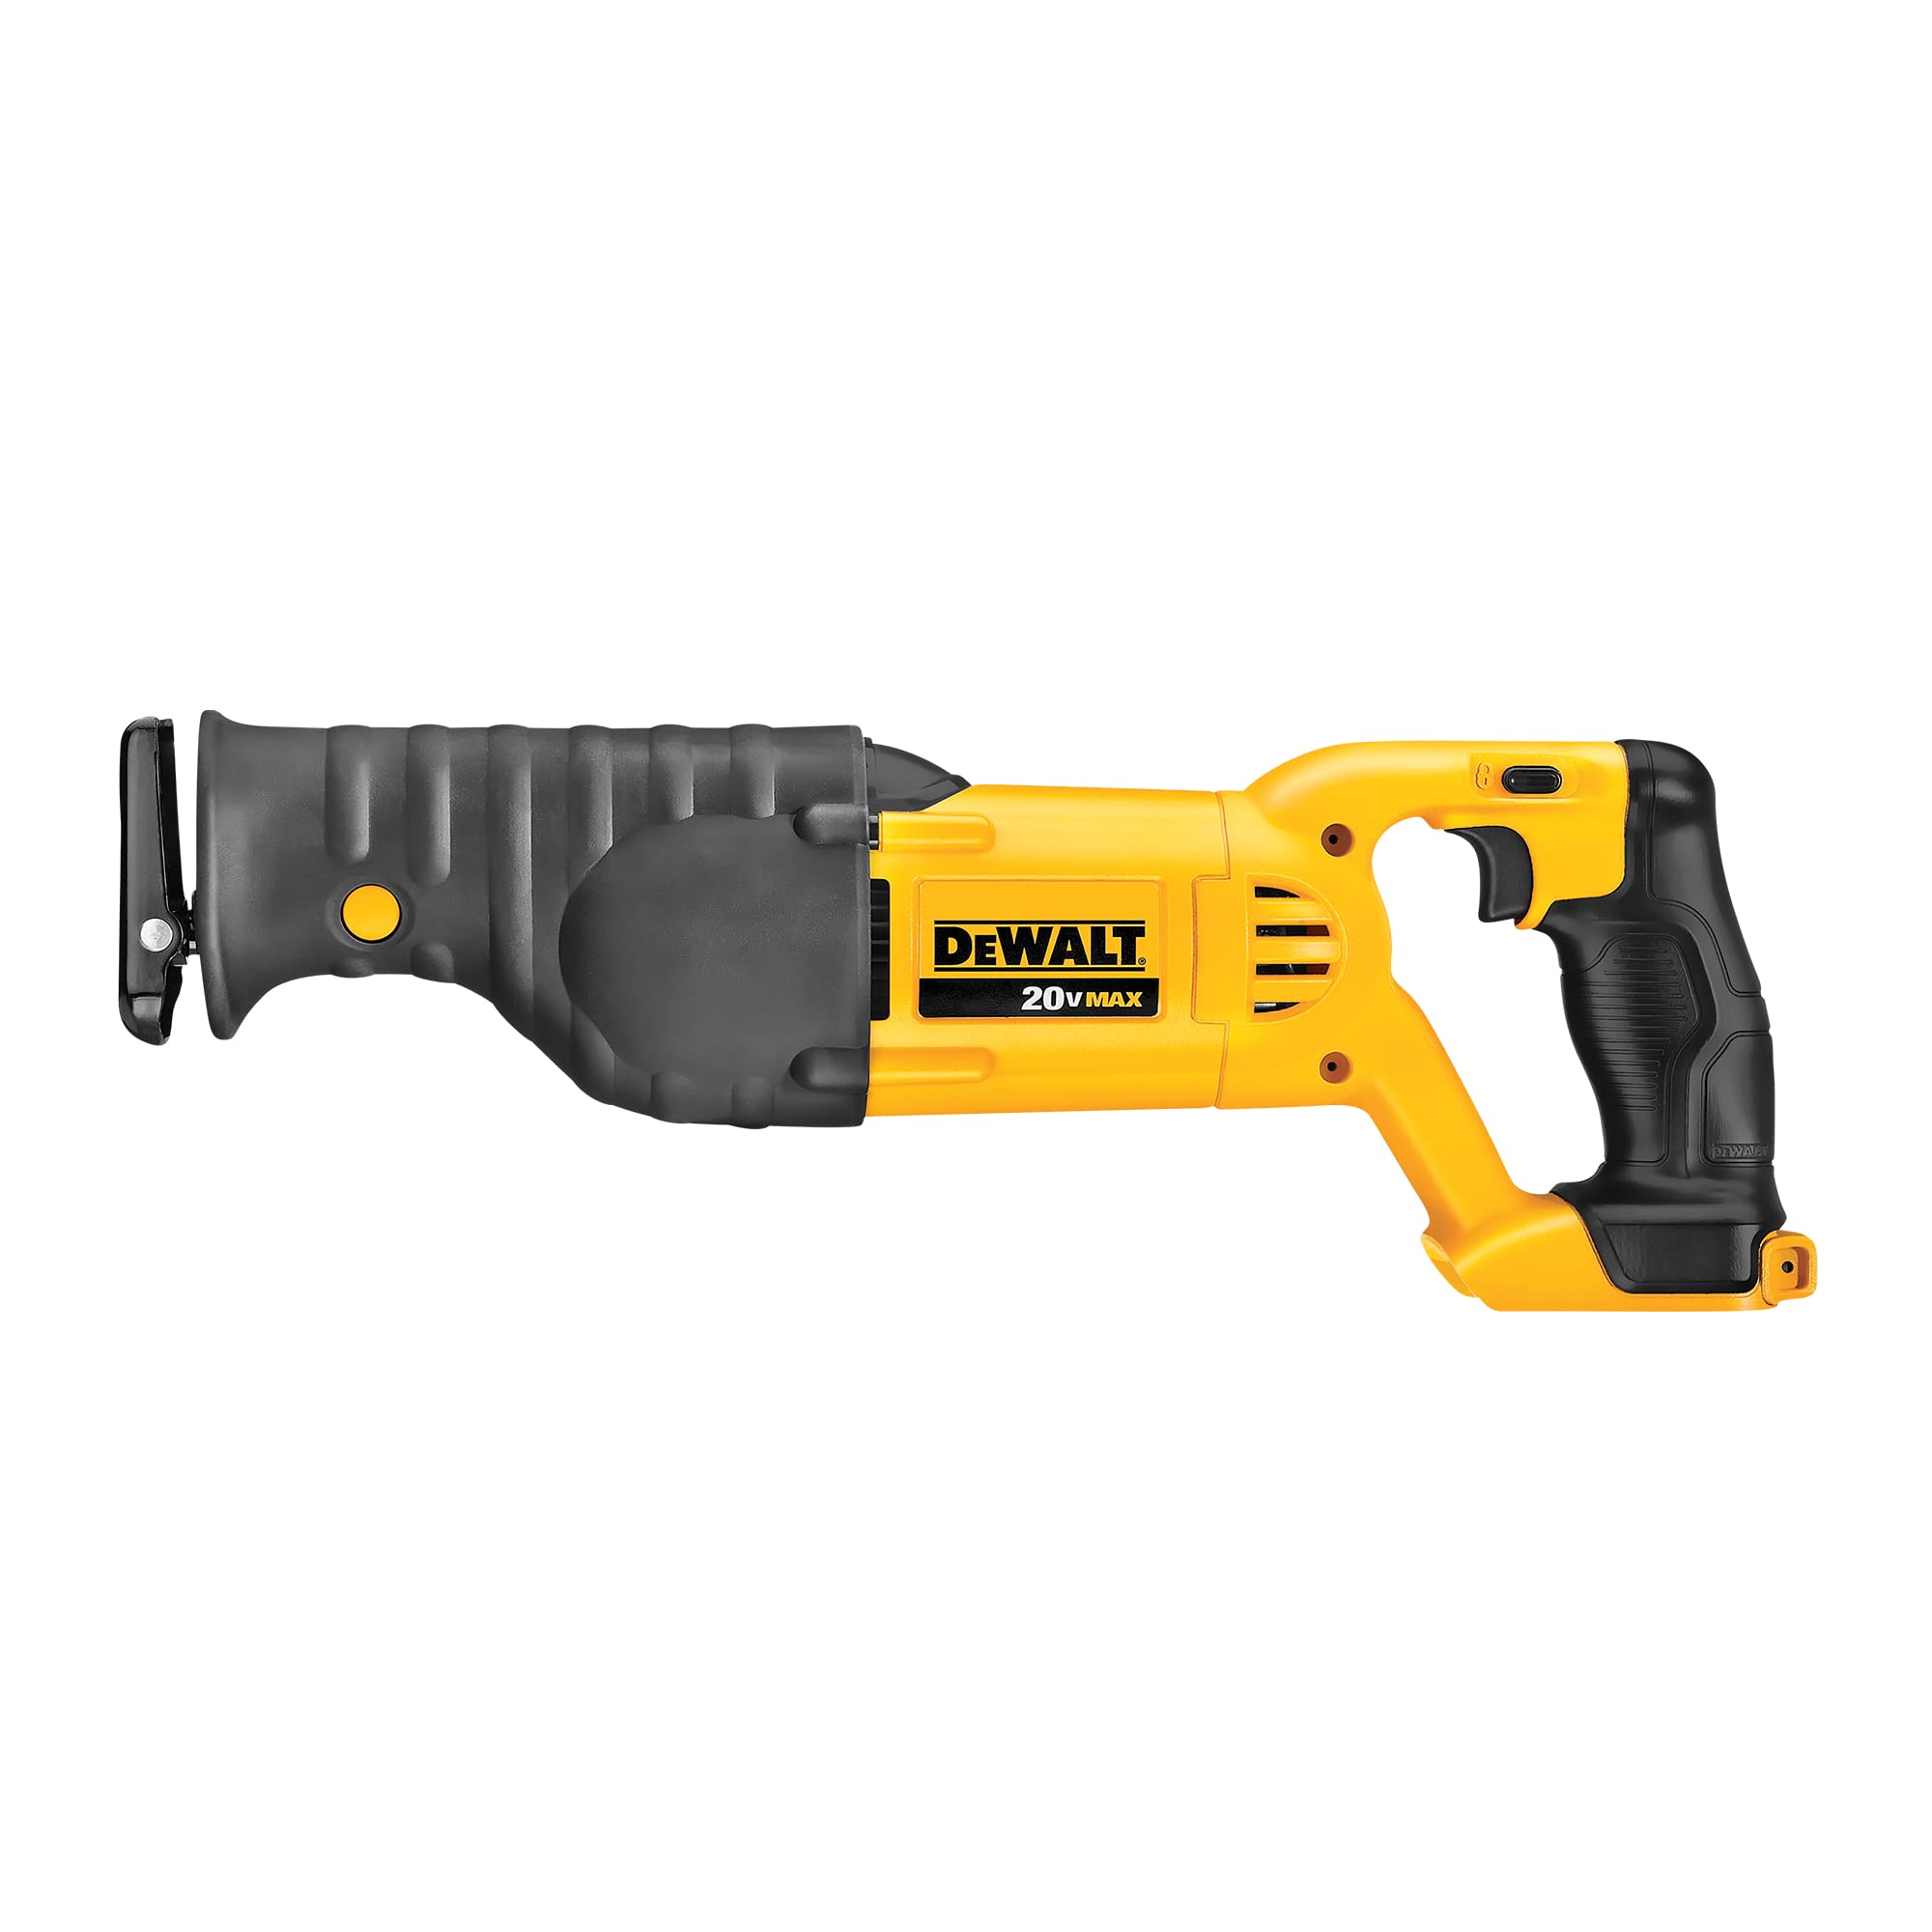 DEWALT 20V MAX Reciprocating Saw 3000 Strokes Per Minute Variable Speed Trigger Bare Tool Only DCS380B BlackClear並